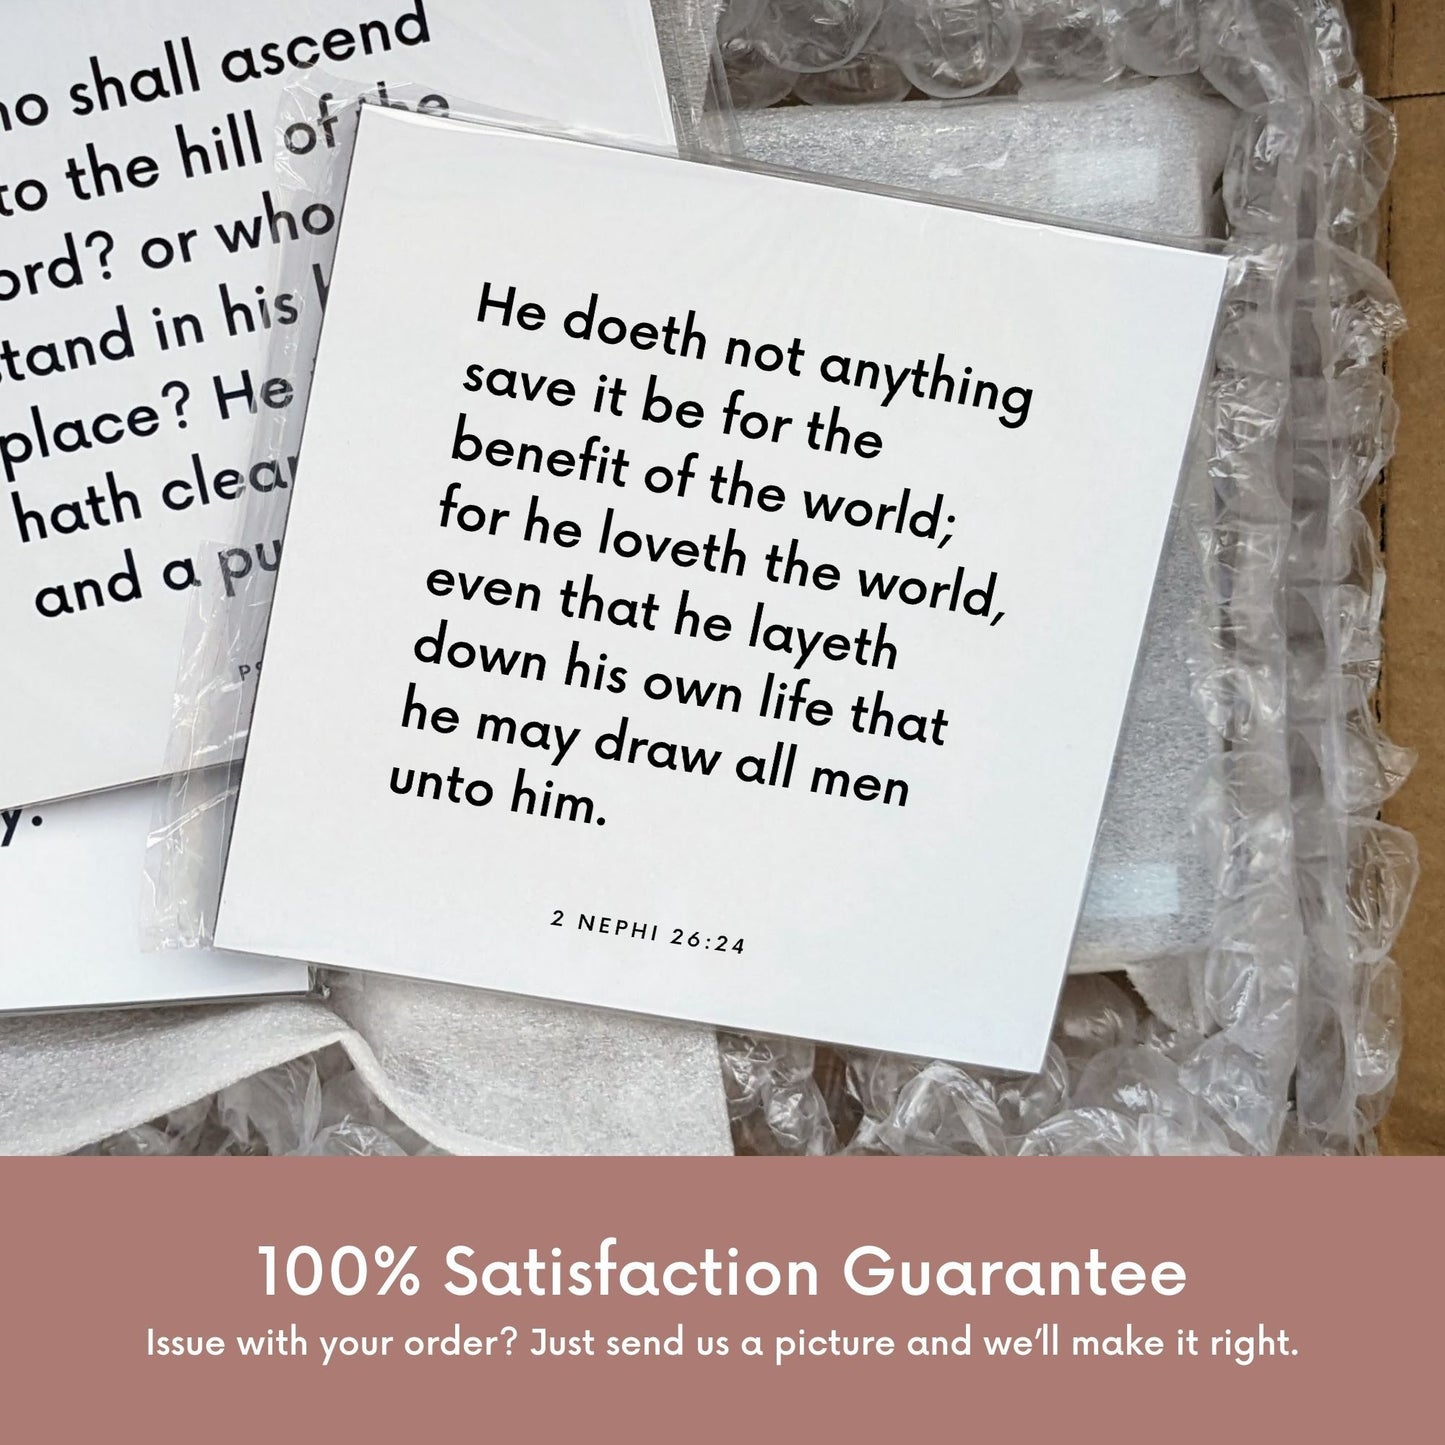 Shipping materials for scripture tile of 2 Nephi 26:24 - "He loveth the world, even that he layeth down his own life"